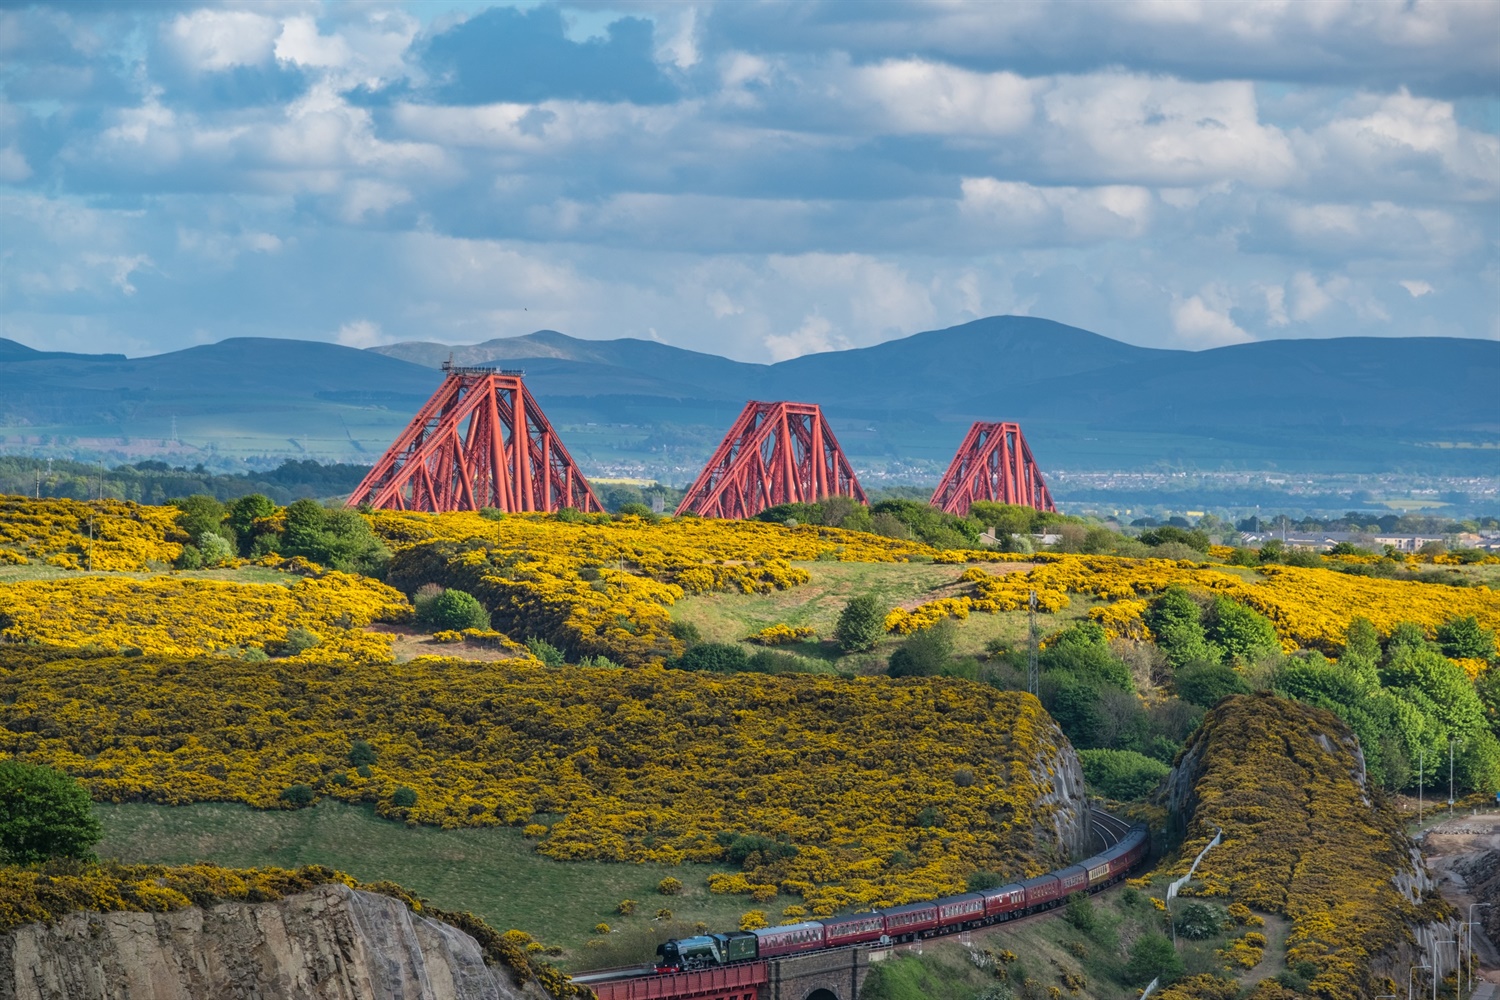 UK Governments continue with plans for three-hour London to Scotland journeys